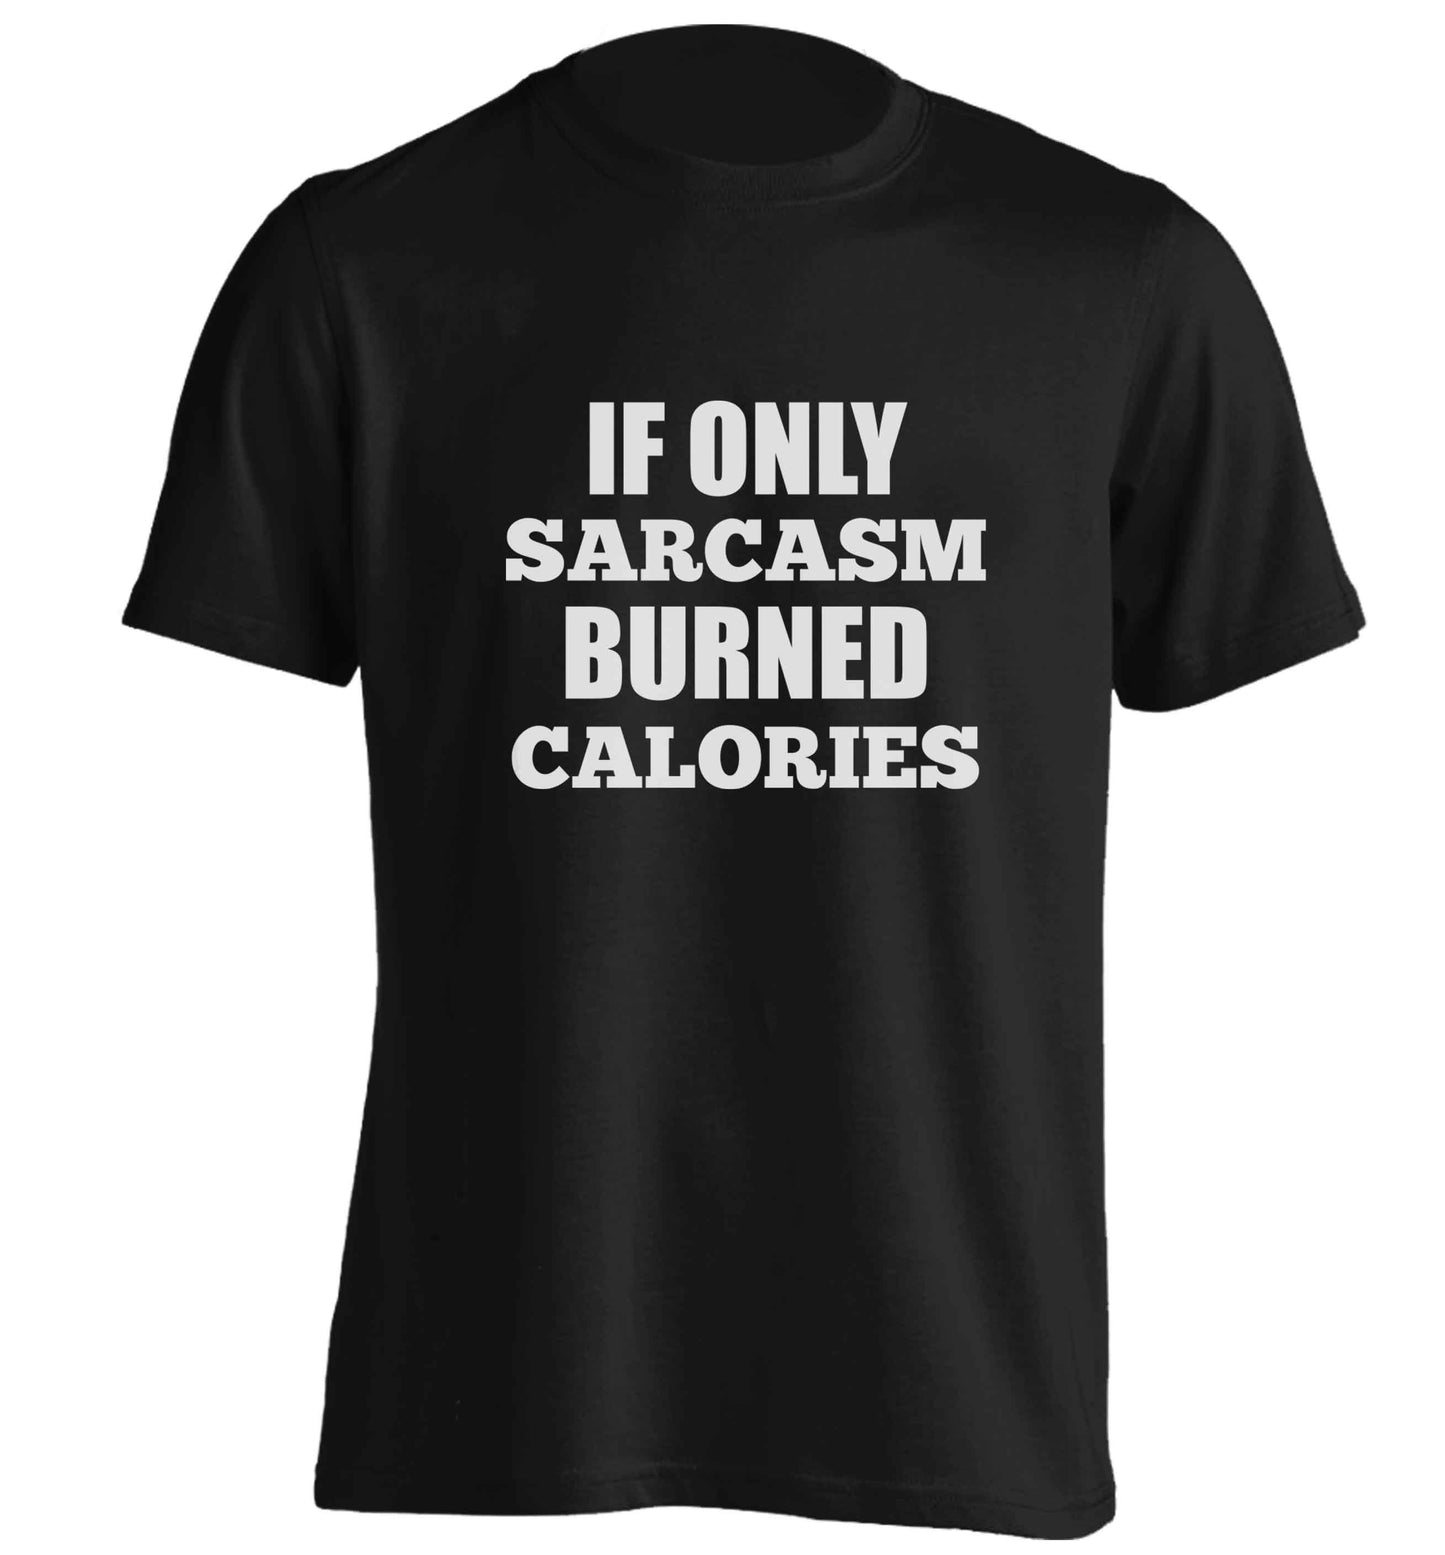 If only sarcasm burned calories adults unisex black Tshirt 2XL